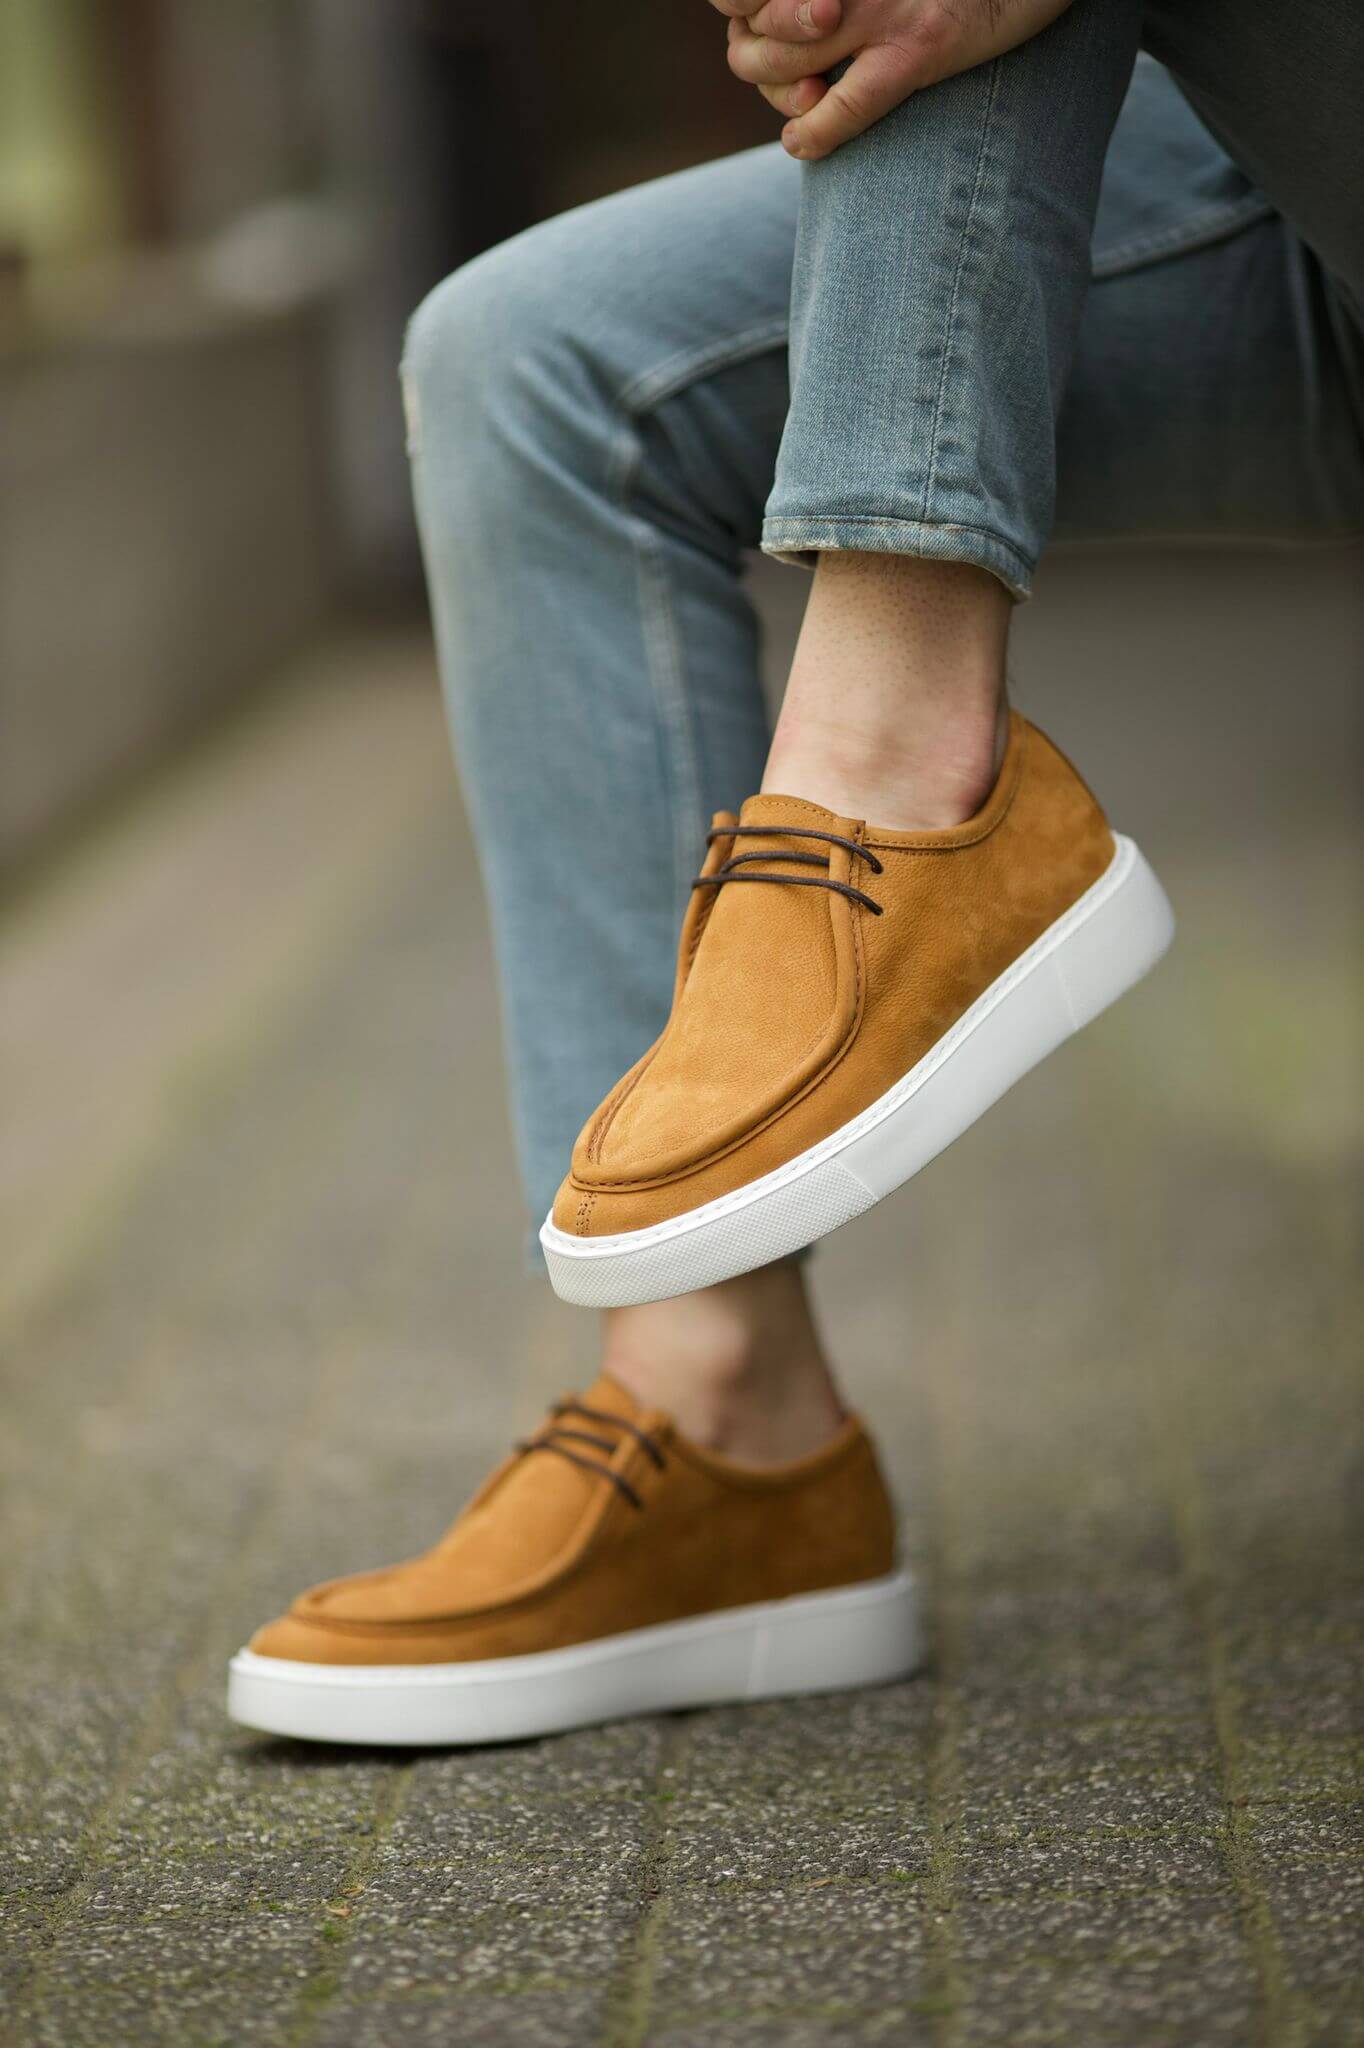 A Camel Casual Lace Up Shoe on display.